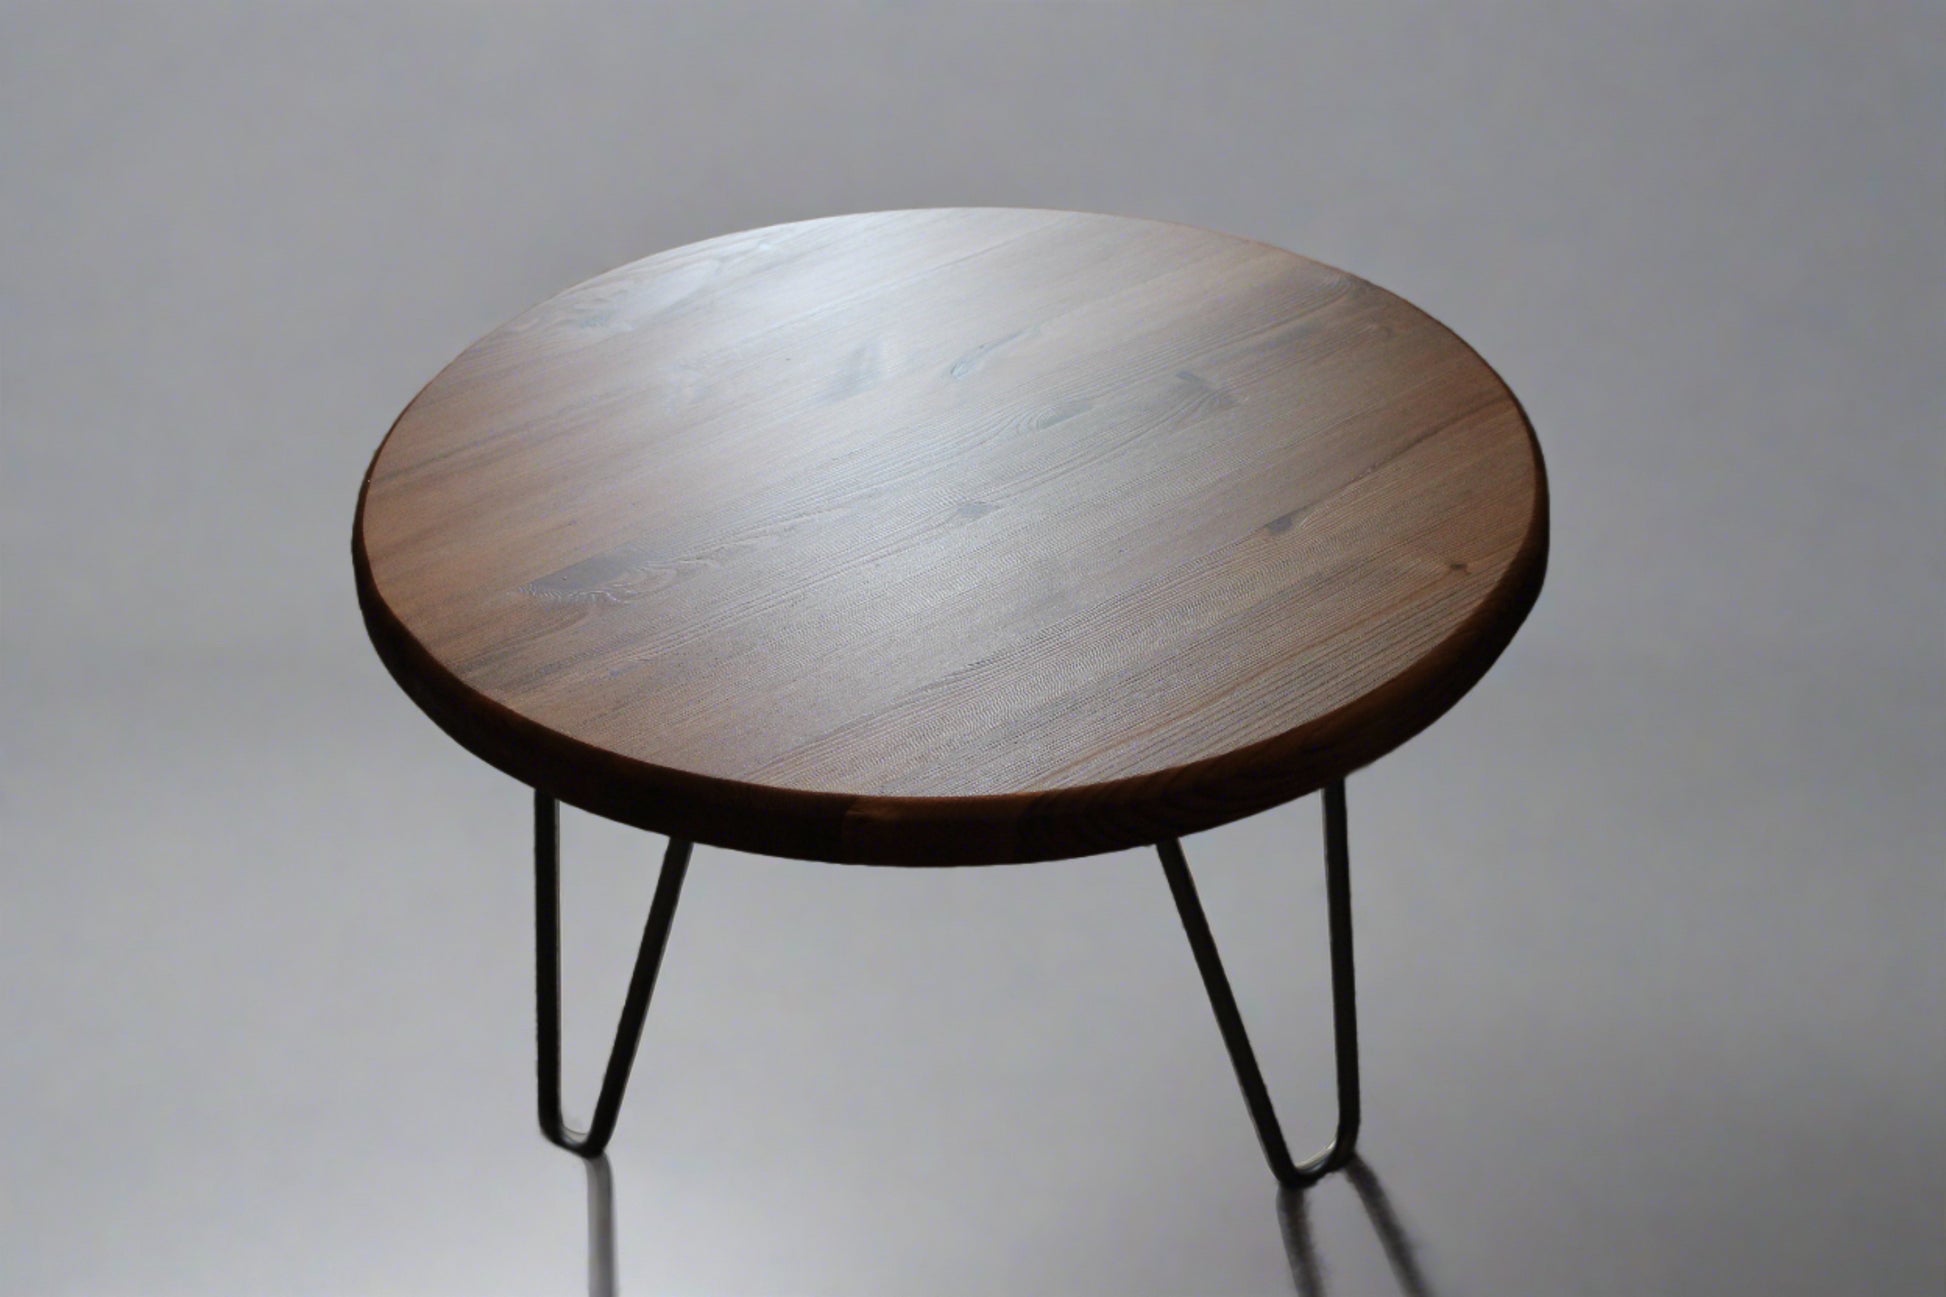 Low Round Coffee Table Wood, Rustic, Industrial Round Table COLOUR FURNITURE